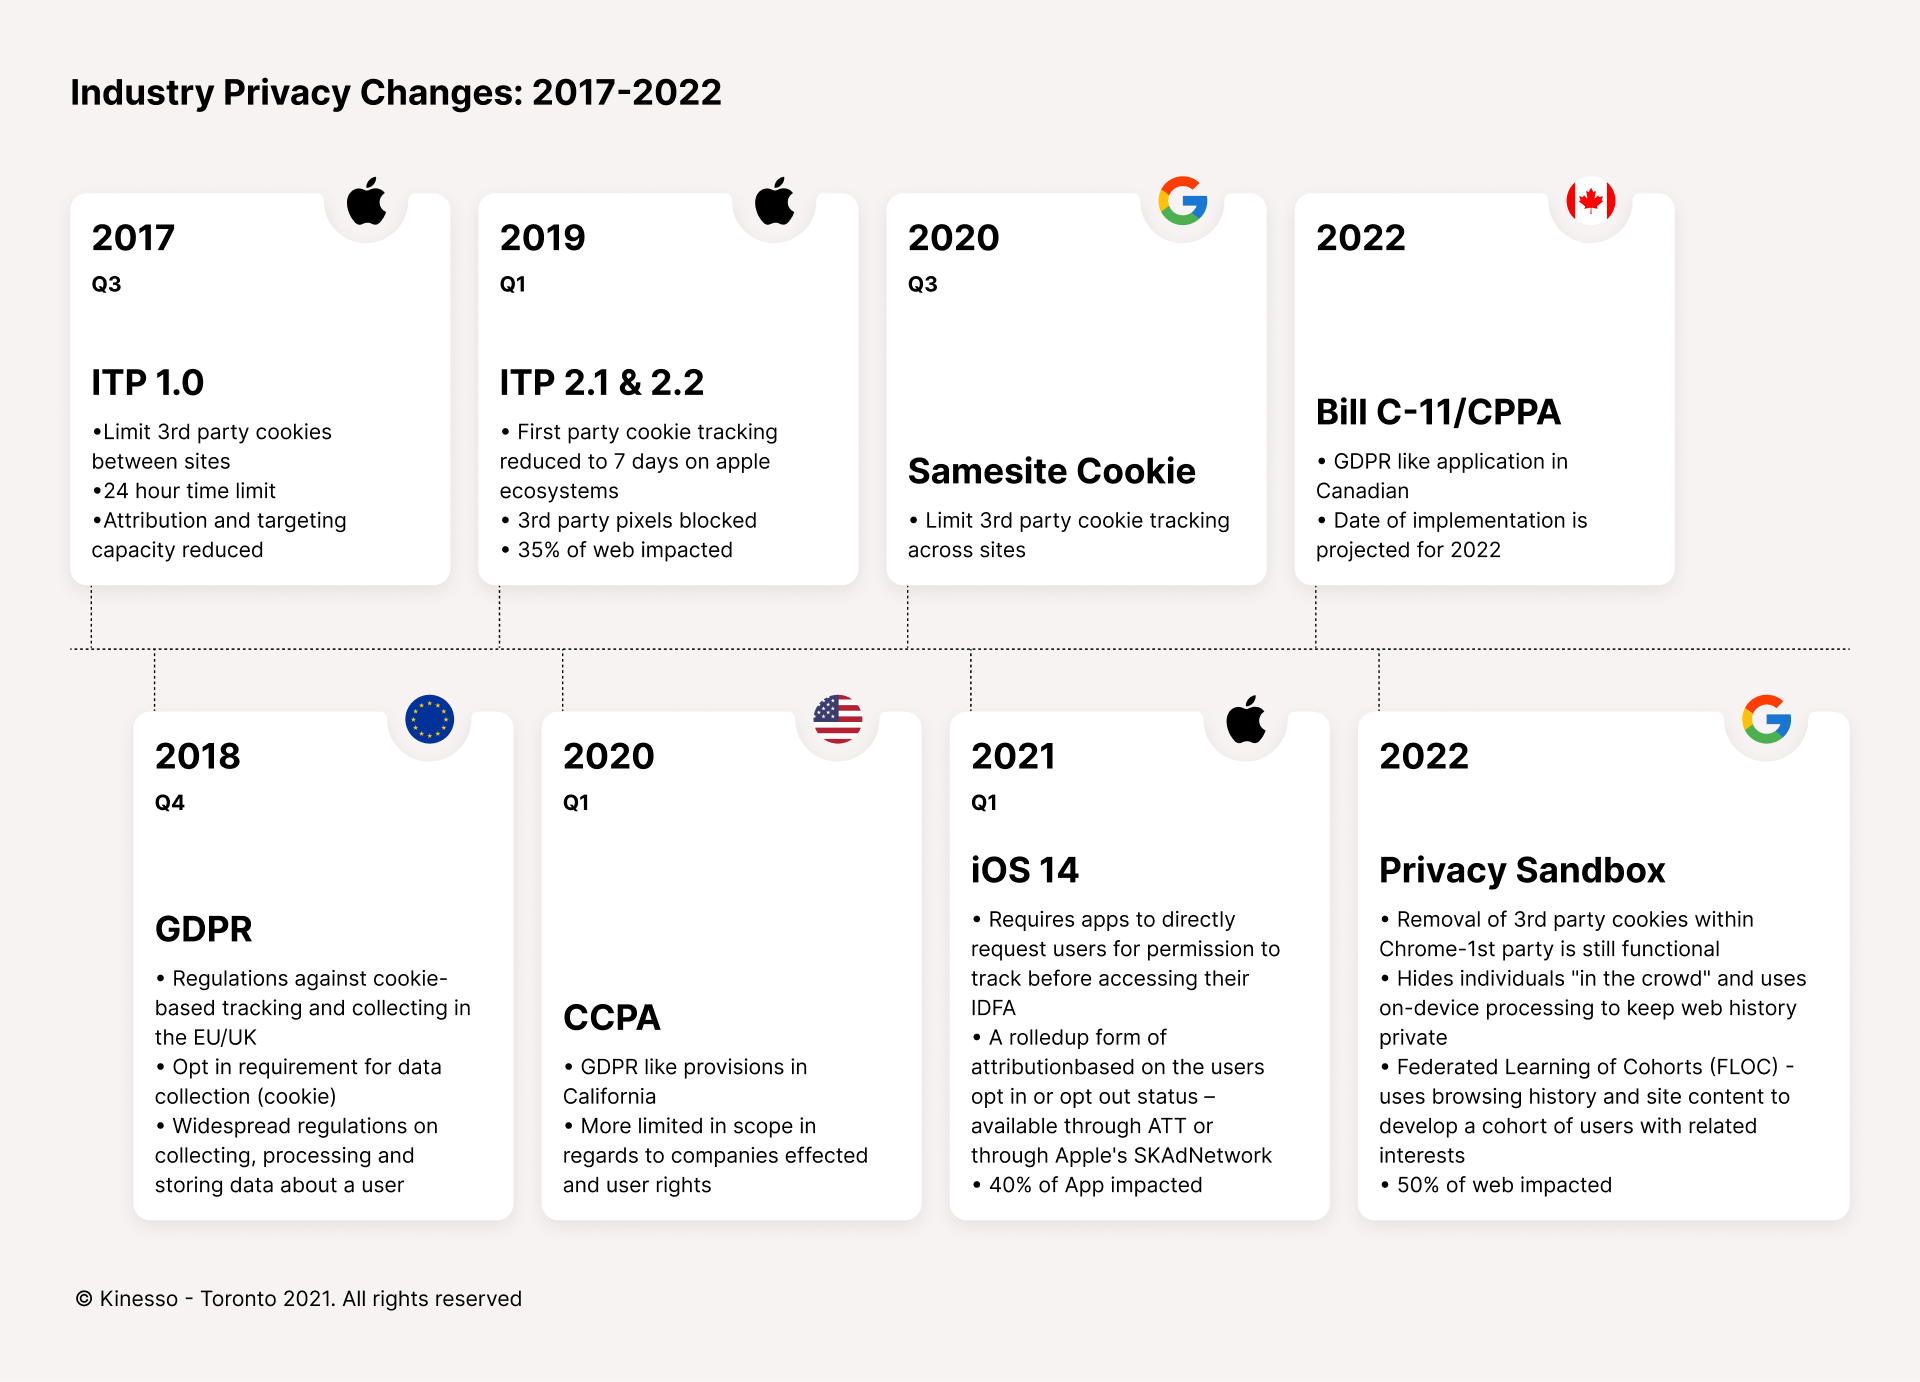 Kinesso - Industry Privacy Changes (2017-2022)